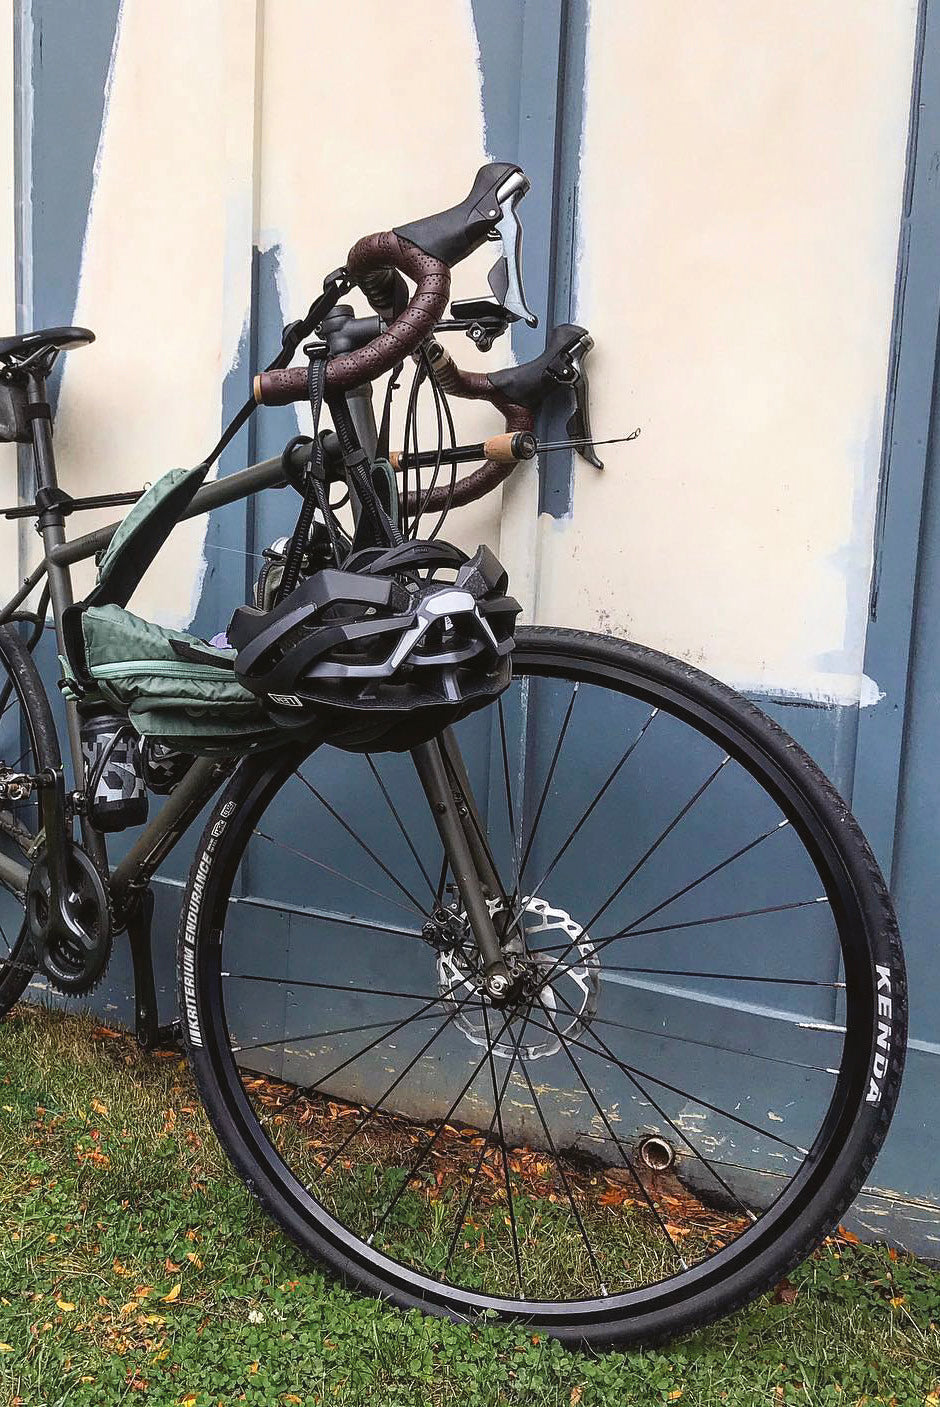 KENDA Tires mounted on a touring bike with pack and fishing rod